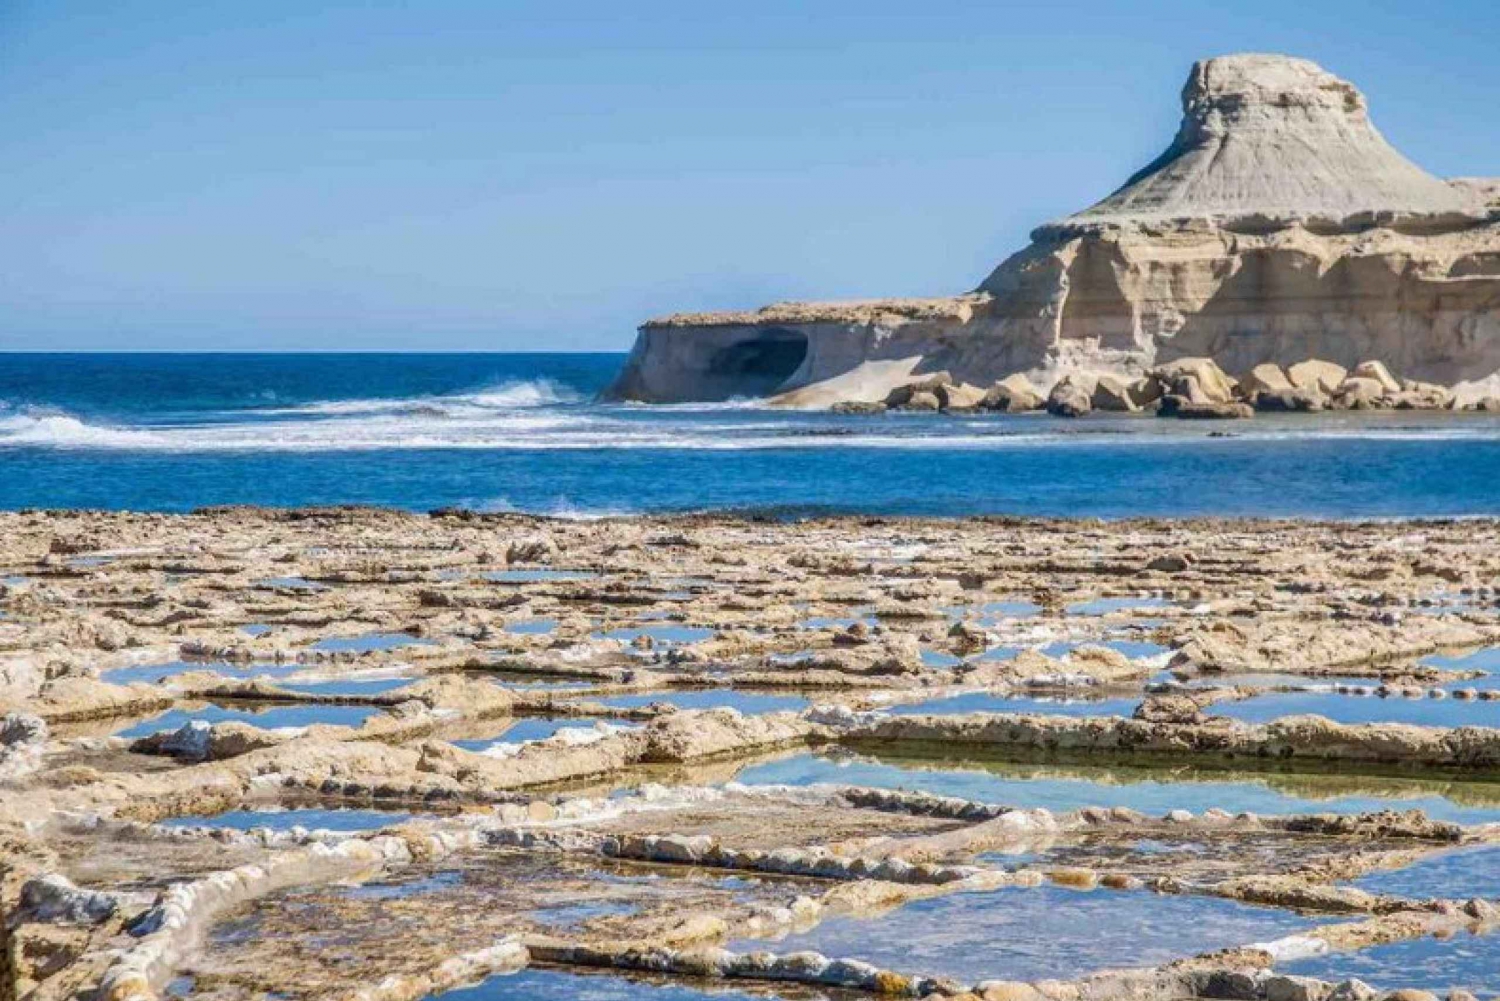 From Malta: Gozo Tour with Ggantija Temples Entry Ticket